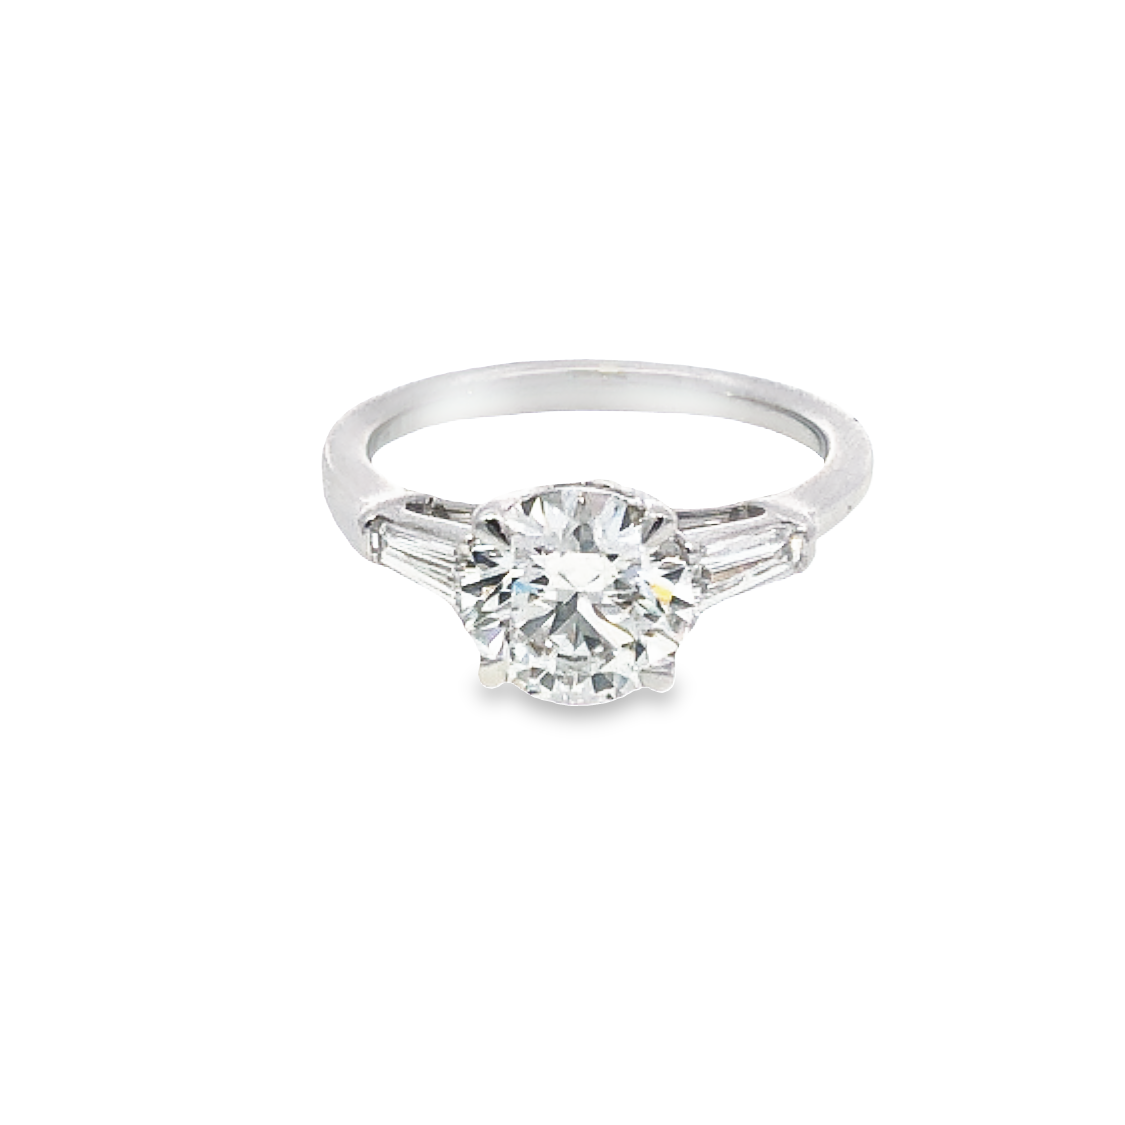 14K White Gold Lab Grown Engagement Ring with 1 Lab Grown Round Brilliant Cut Diamond 2.00ct G VS1 and 2 Lab Grown Tapered Baguette Diamonds 0.41ctw G VS